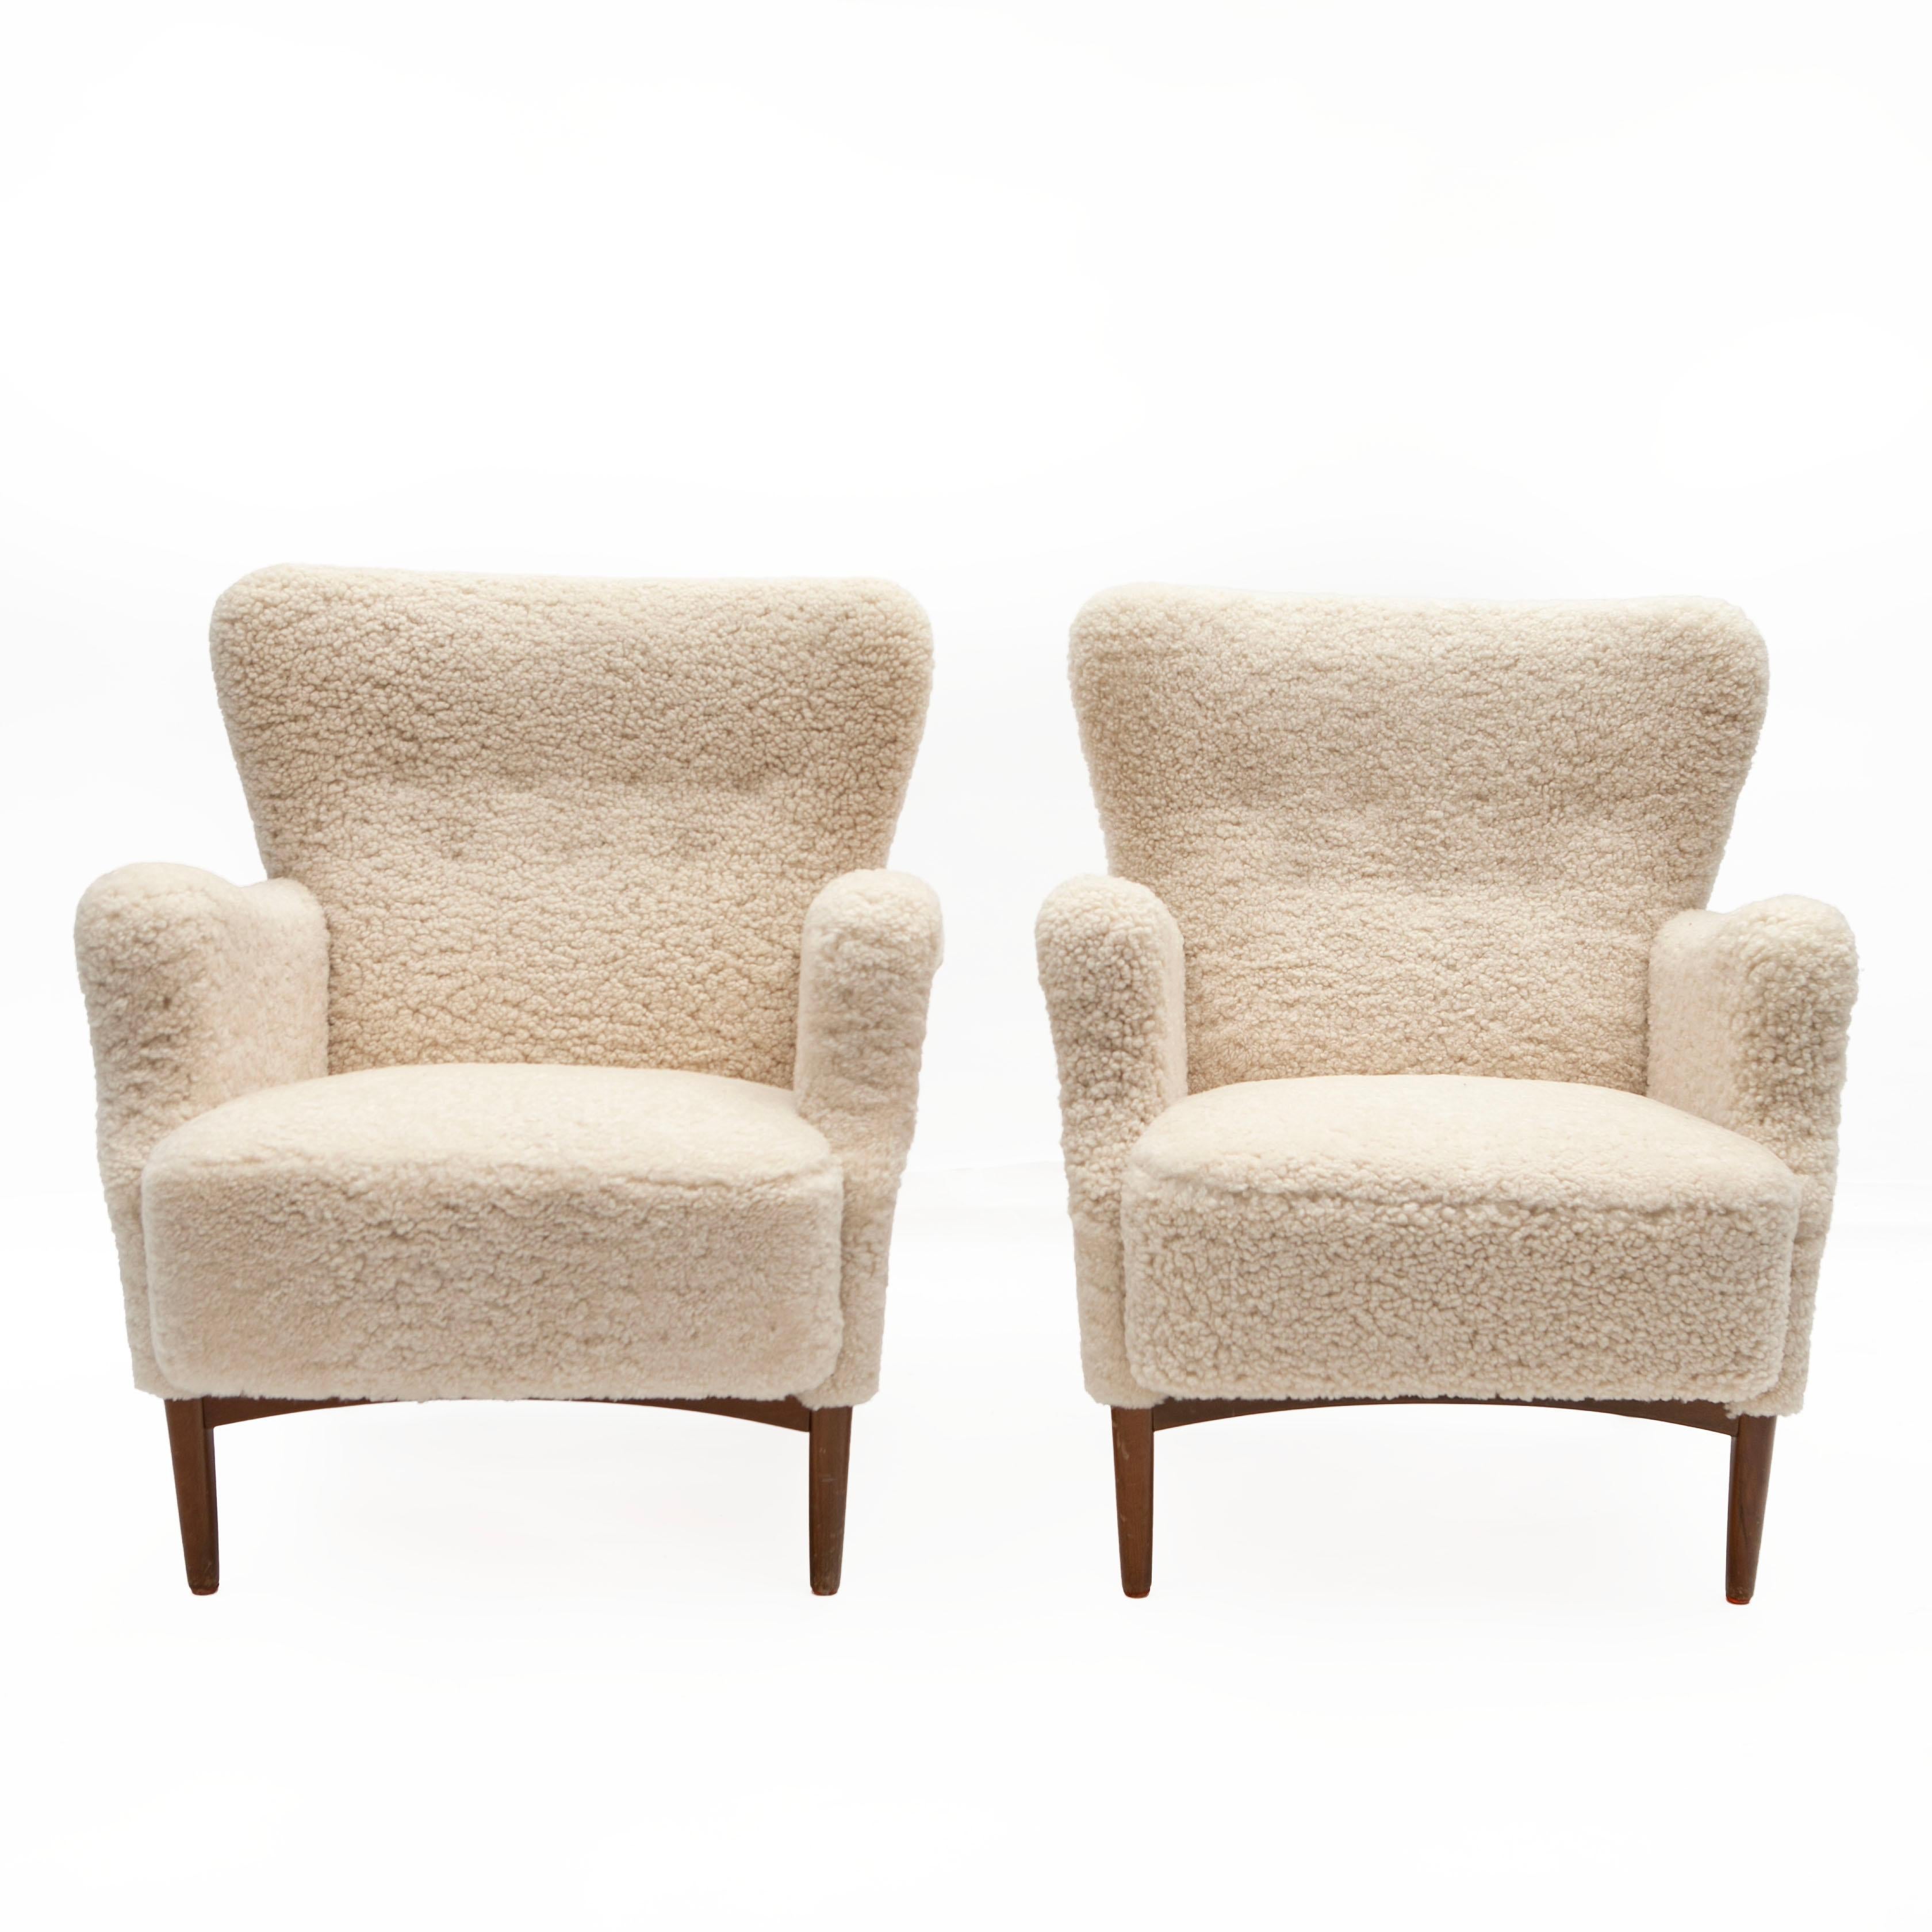 Pair of easy chairs, model 8010, by manufacturers Fritz Hansen.
Sculptural chairs re-upholstered in high quality sheepskin, legs of stained beech. Very good seating comfort.
Denmark circa 1950s.

Literature: Fritz Hansen catalog 1951, p. 59
Price is